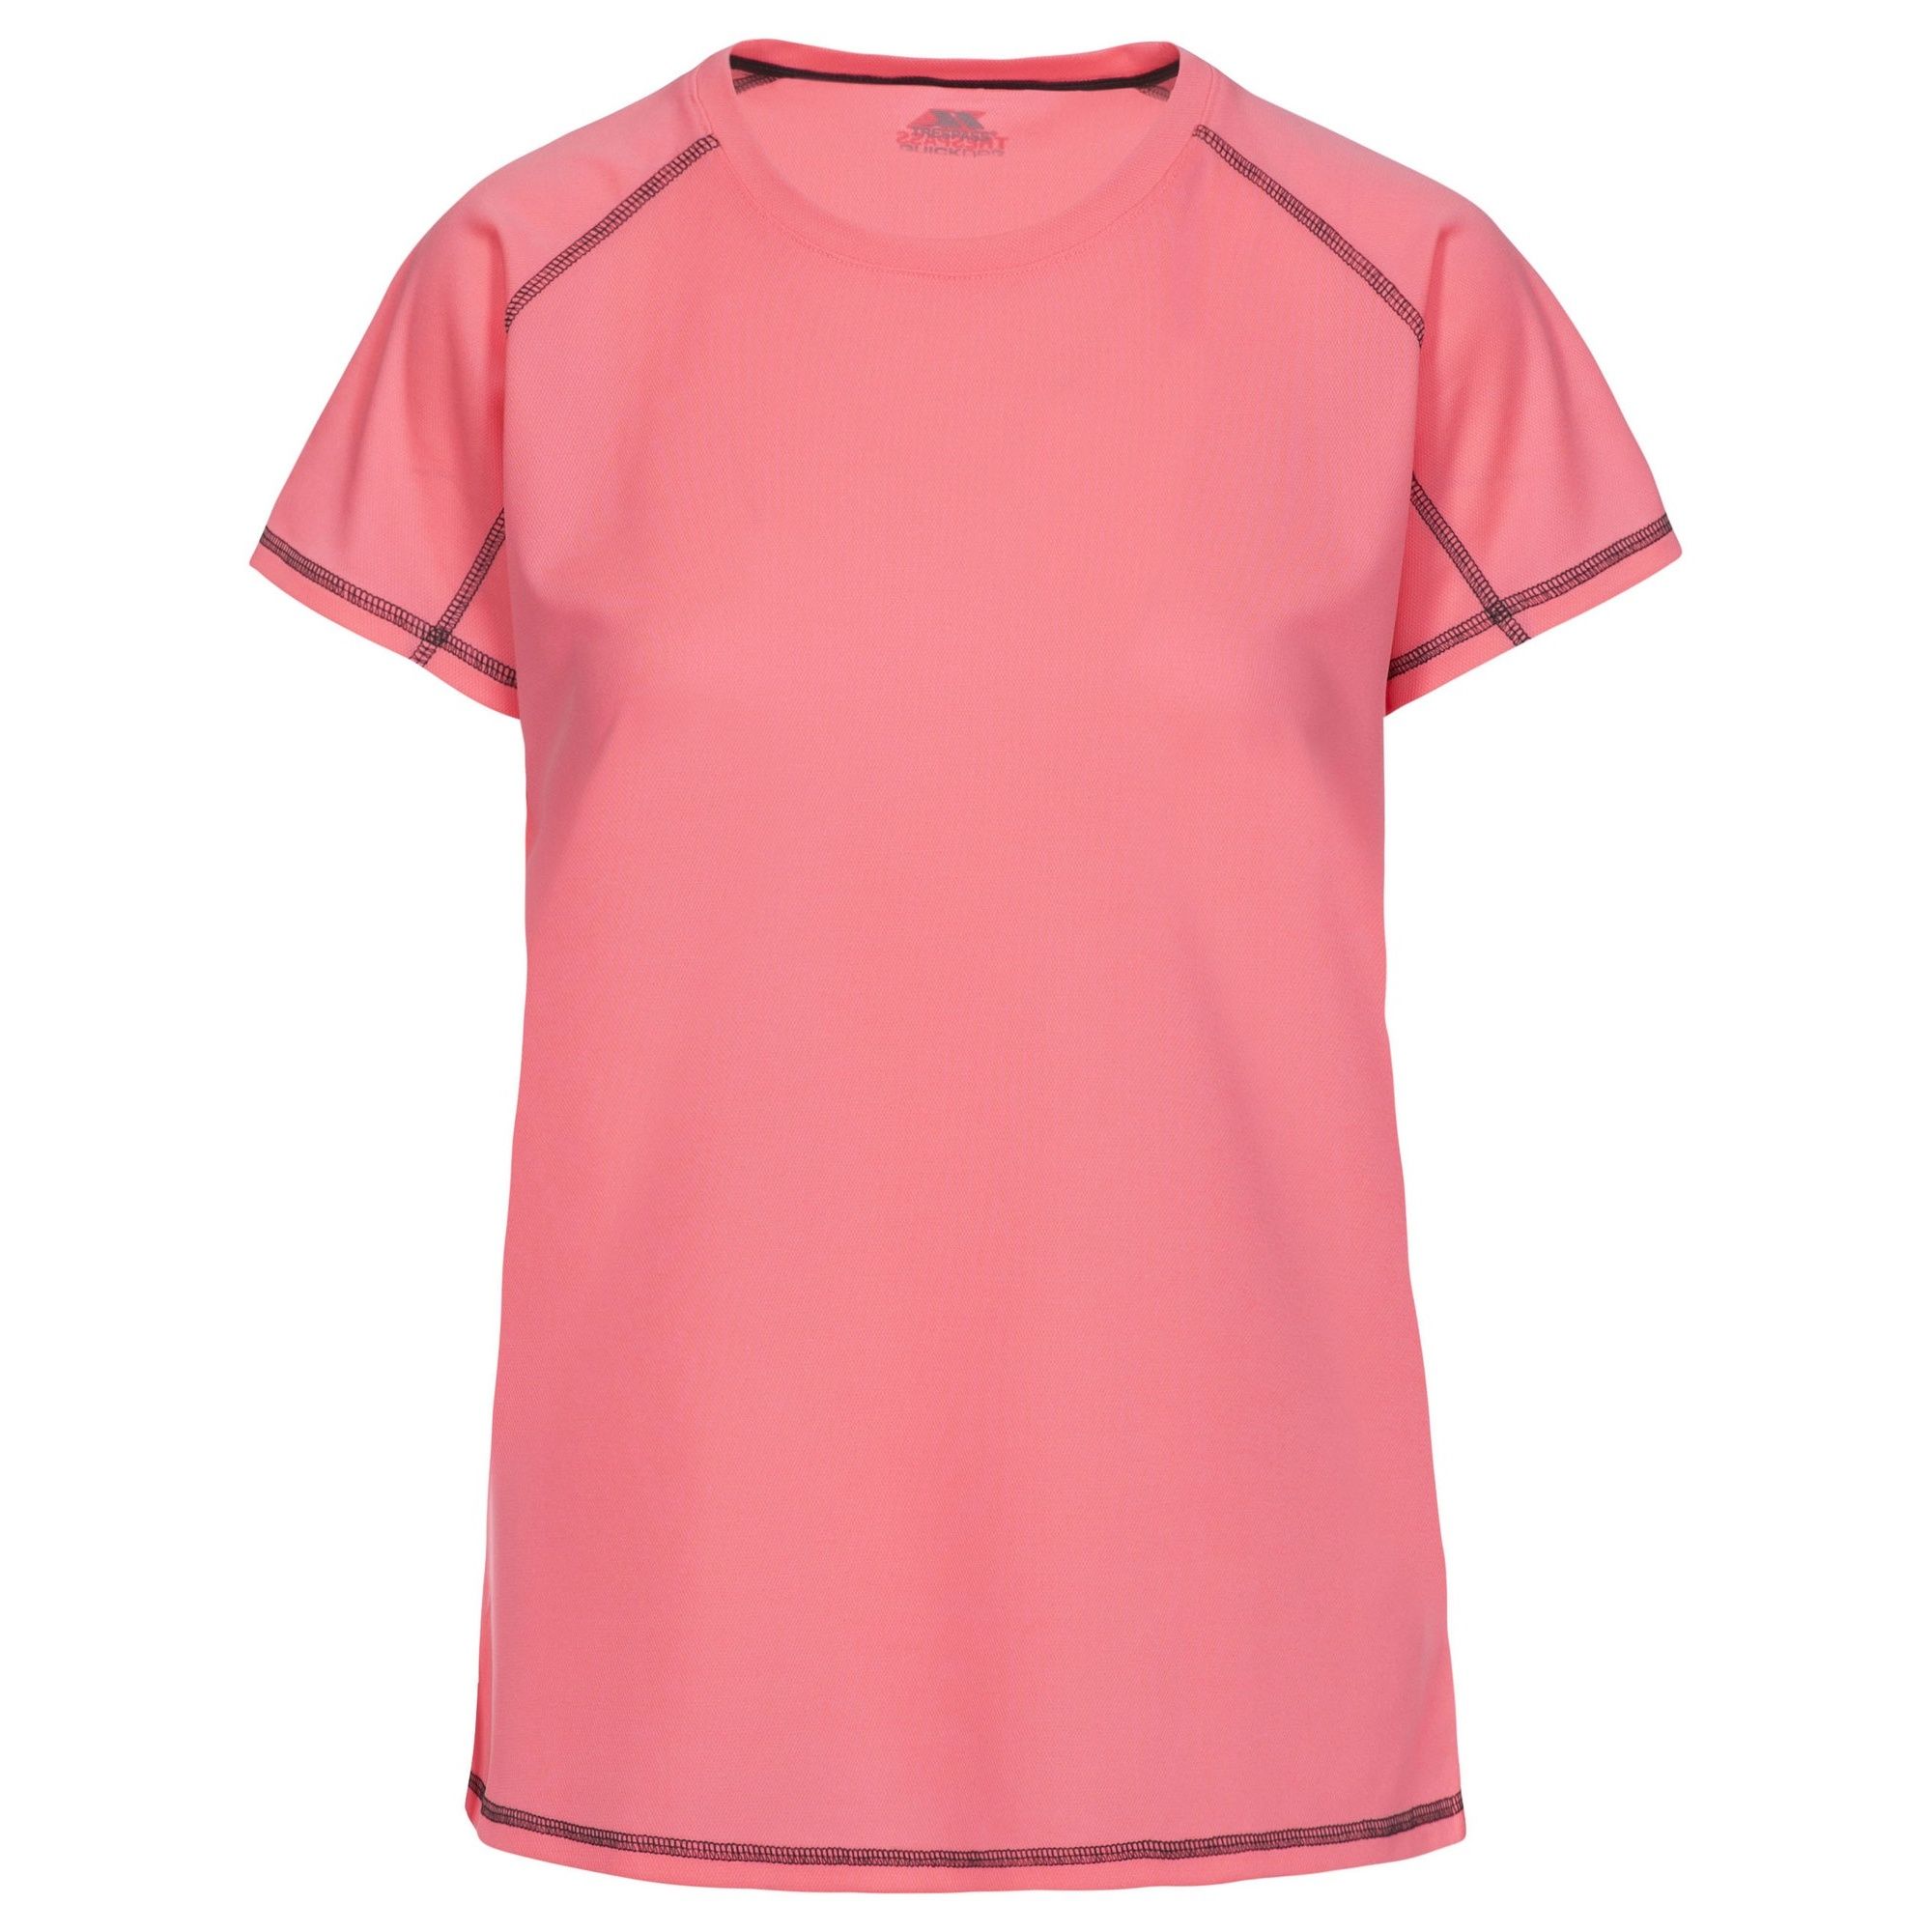 Short sleeves. Round neck. Raglan sleeves. Reflective Trespass prints. Contrast stitching. Quick dry. 100% Polyester eyelet. Trespass Womens Chest Sizing (approx): XS/8 - 32in/81cm, S/10 - 34in/86cm, M/12 - 36in/91.4cm, L/14 - 38in/96.5cm, XL/16 - 40in/101.5cm, XXL/18 - 42in/106.5cm.